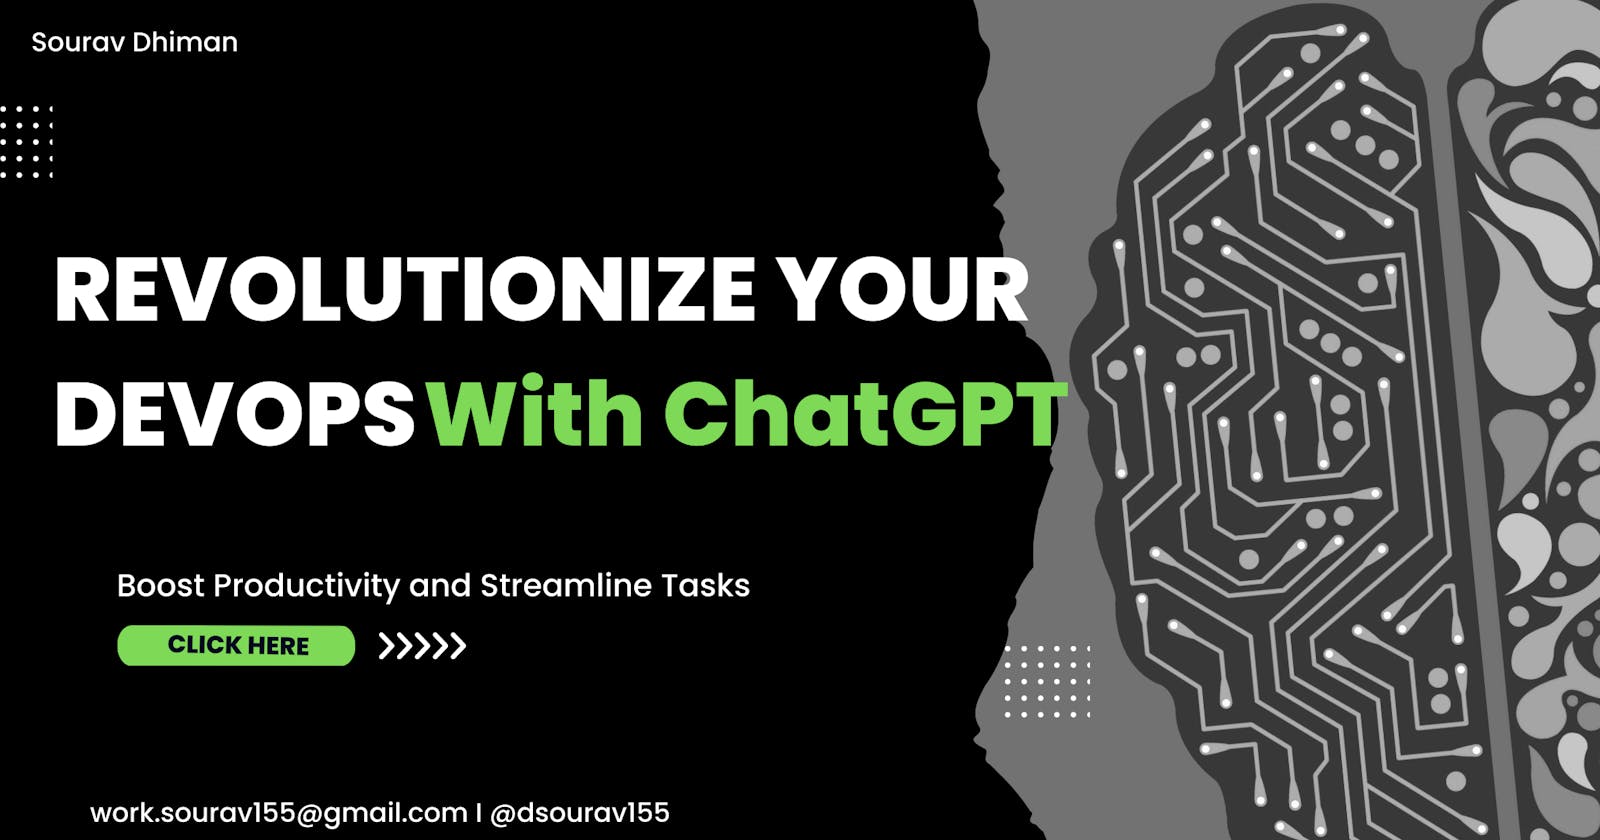 Revolutionize Your DevOps with ChatGPT: Boost Productivity and Streamline Tasks